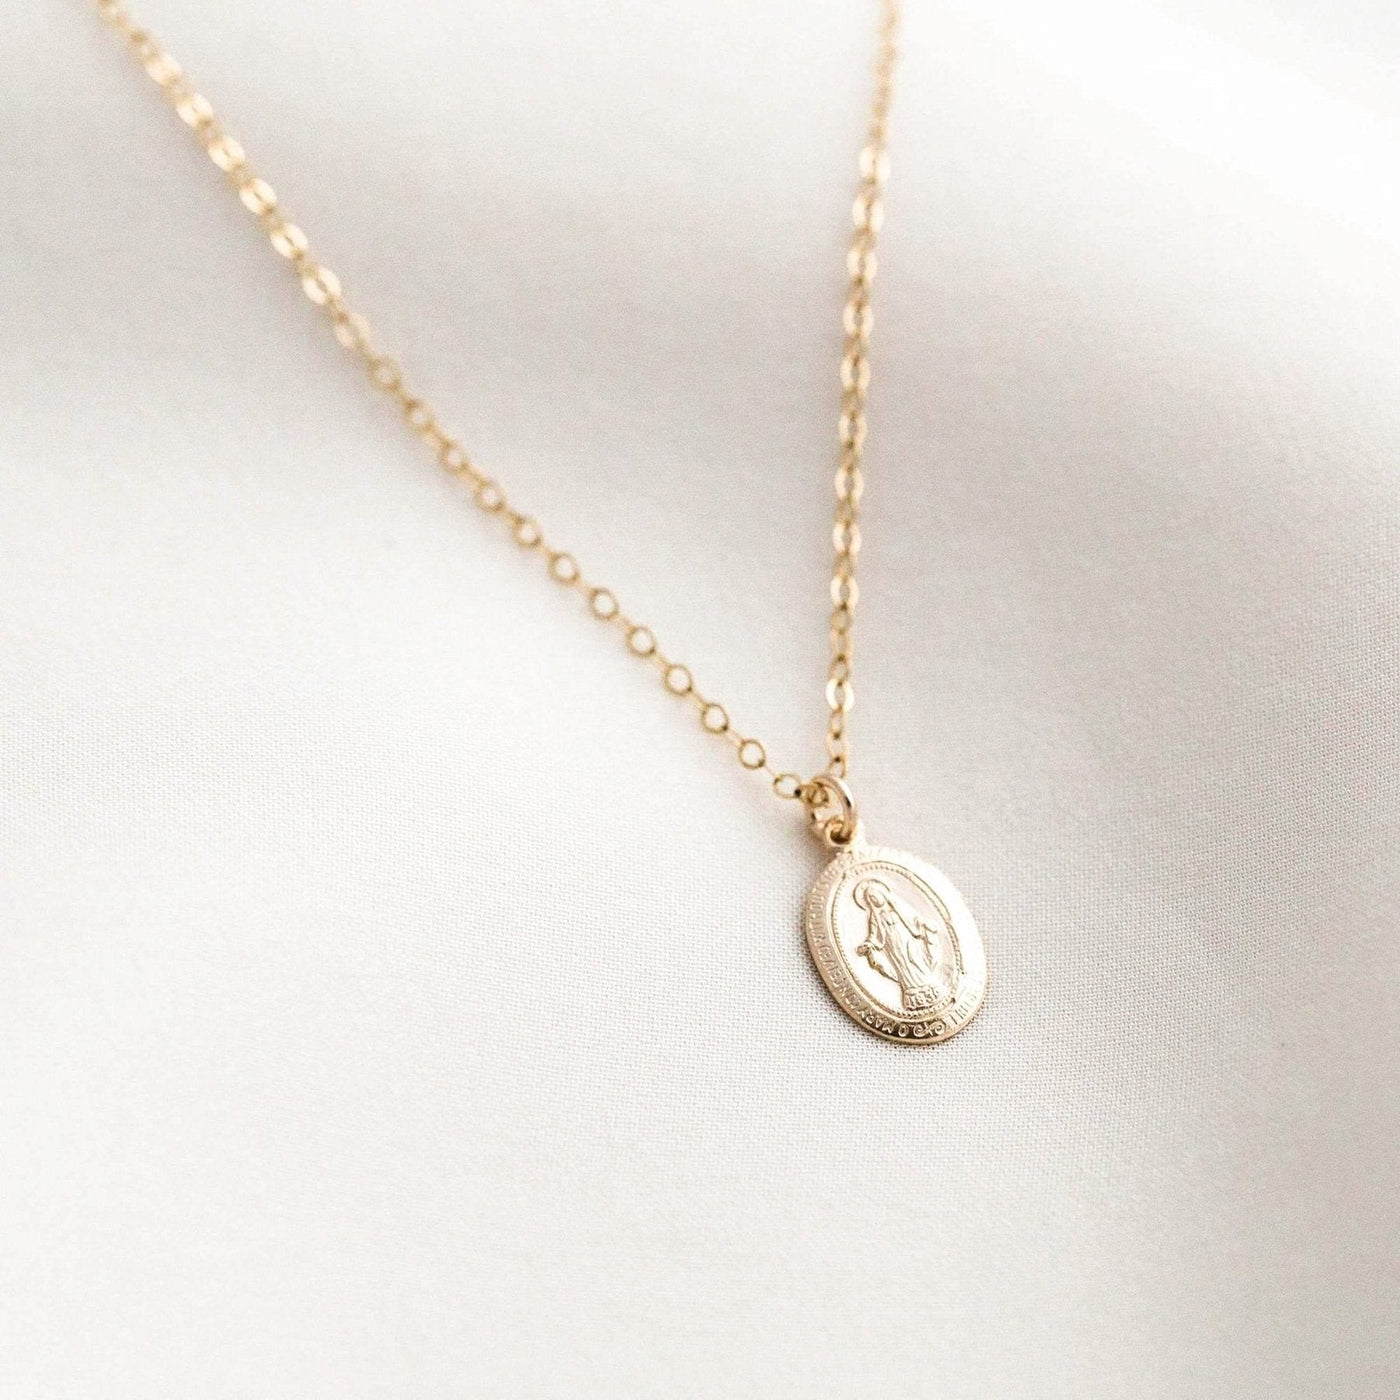 Tiny Virgin Mary Necklace by Simple & Dainty Jewelry